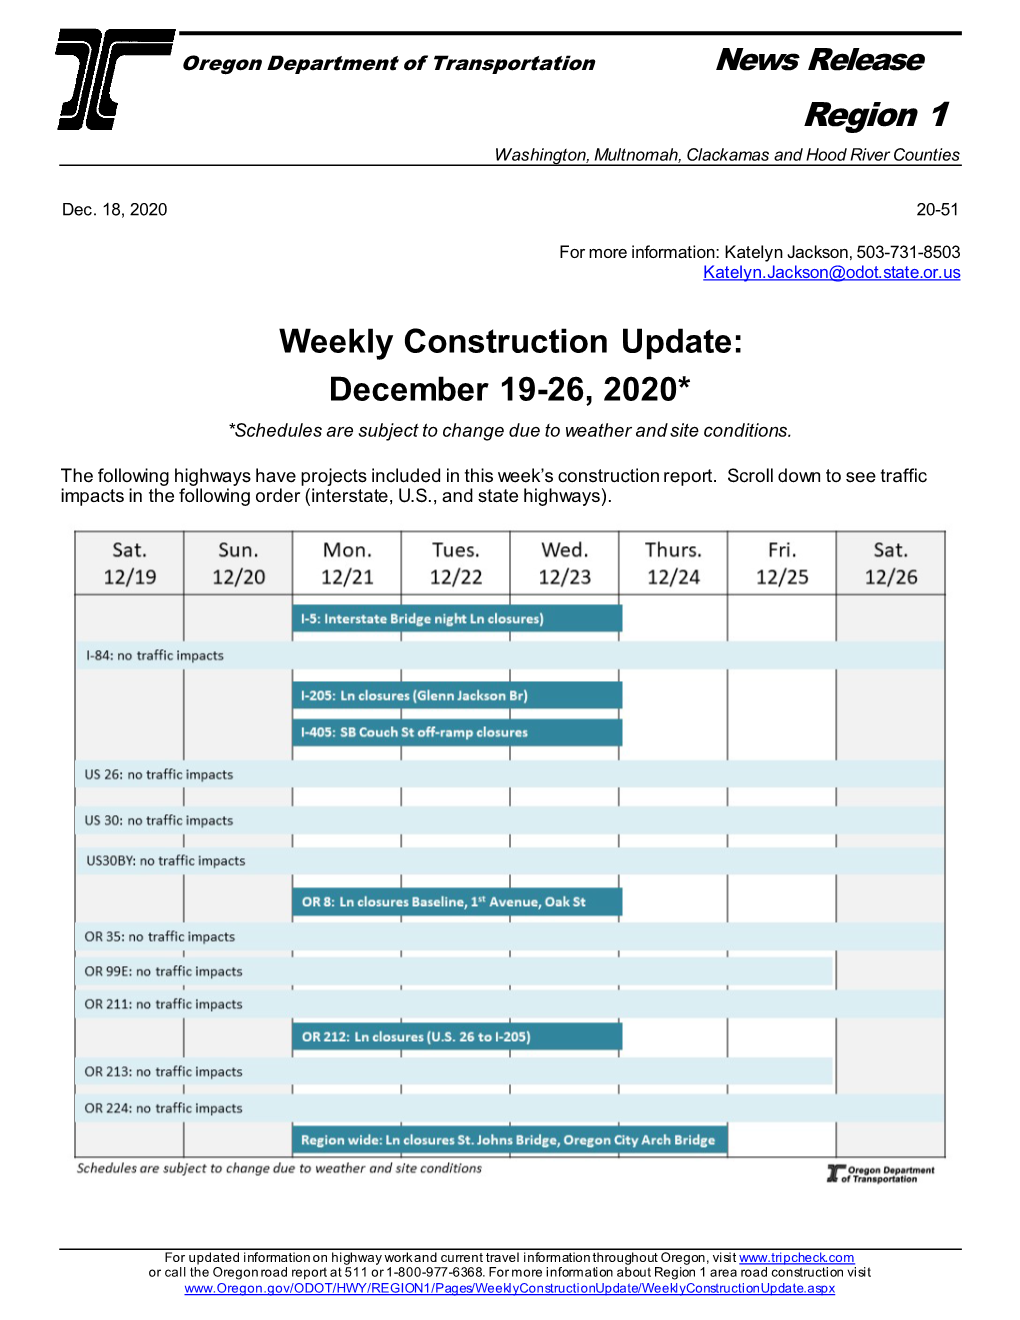 Dec. 19-26, 2020 Weekly Construction Update Page 2 of 5